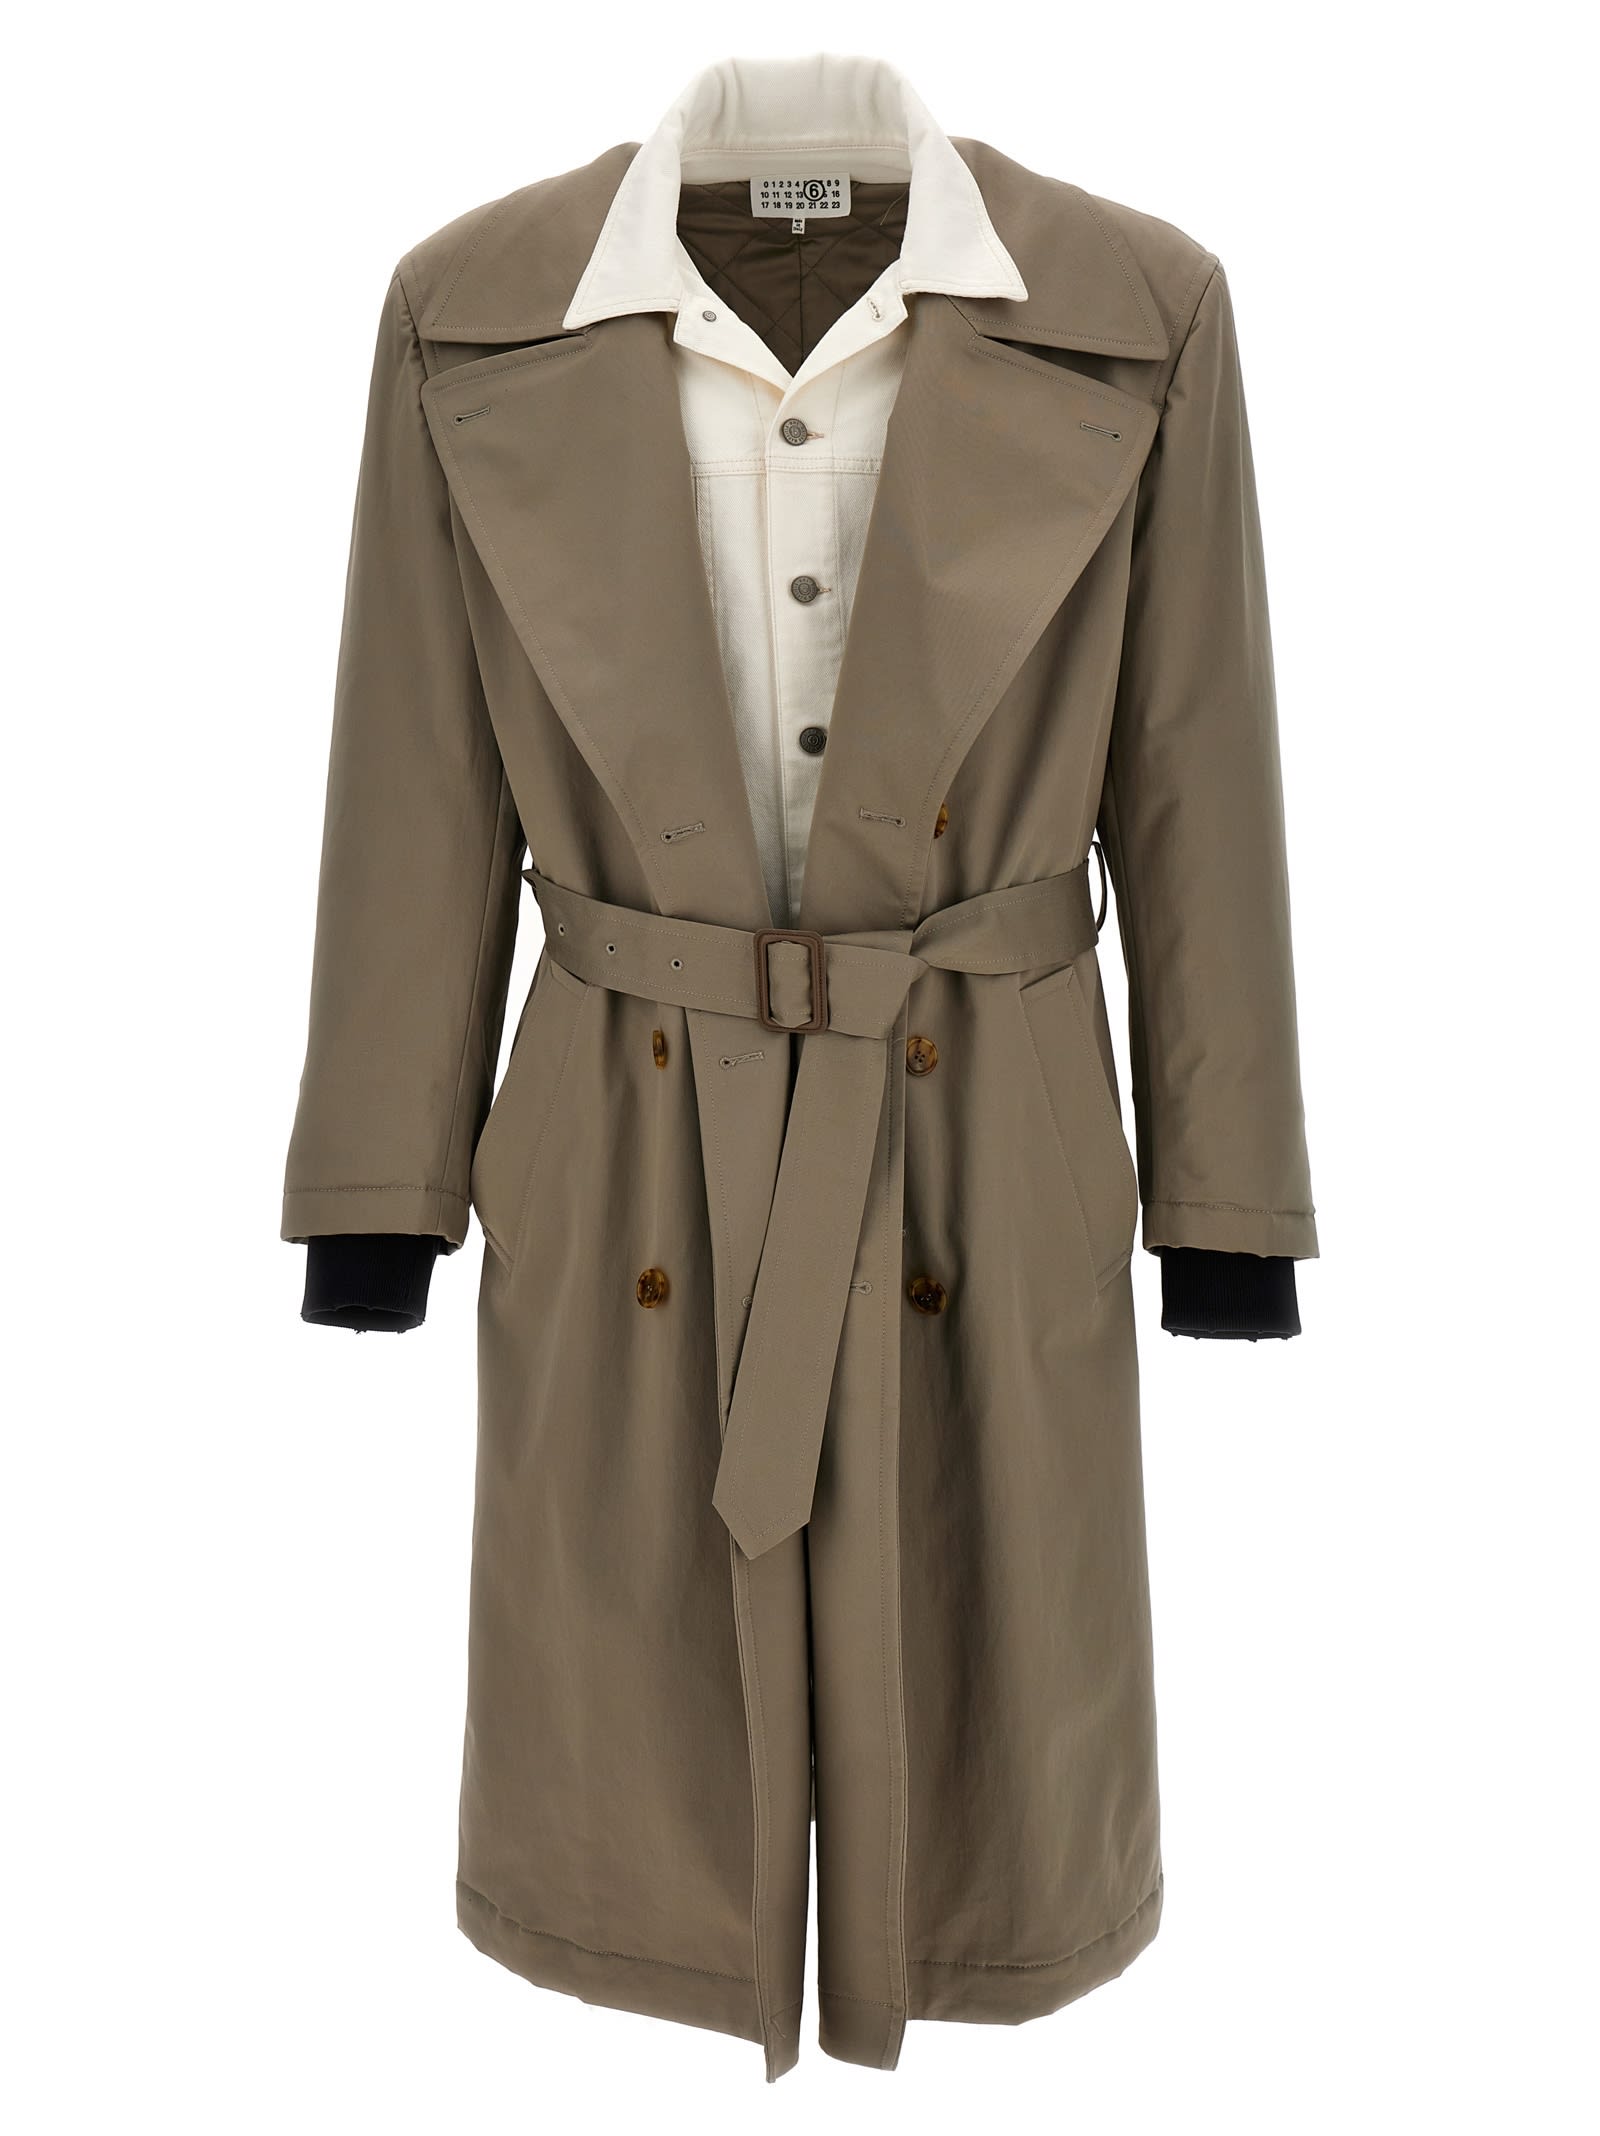 MM6 MAISON MARGIELA TRENCH COAT WITH CONTRASTING INSERTS